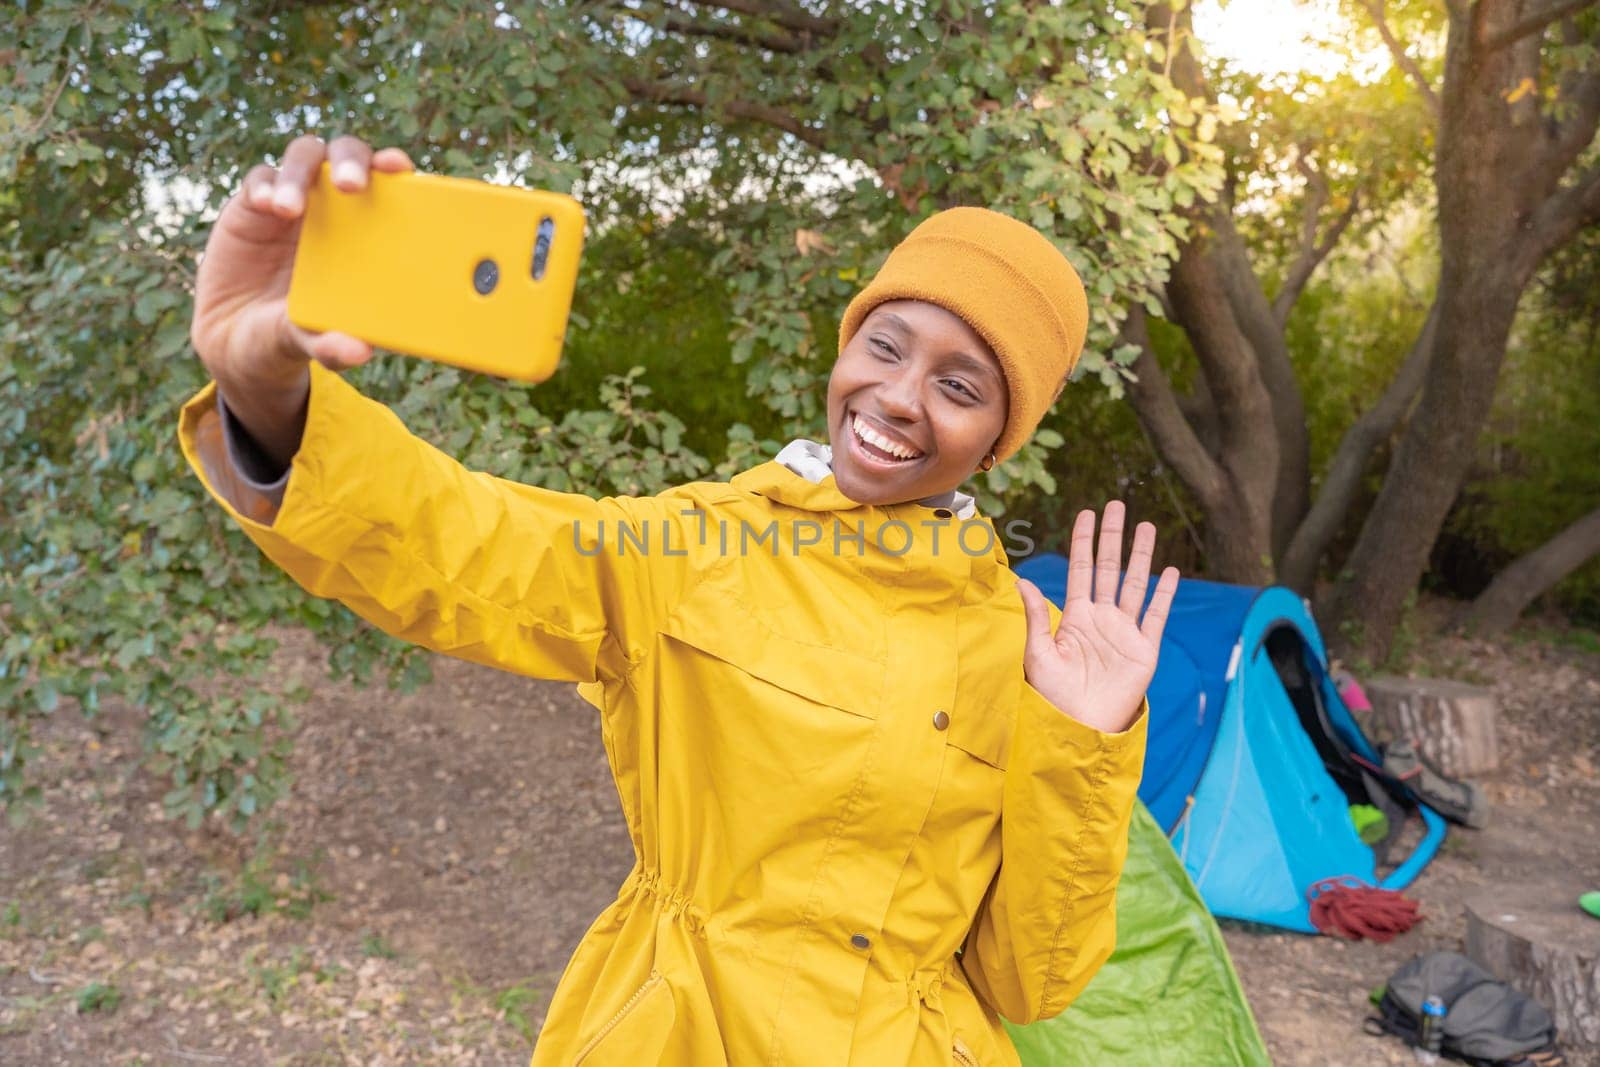 Woman in a yellow jacket is taking a selfie with her cell phone surrounded by nature by PaulCarr